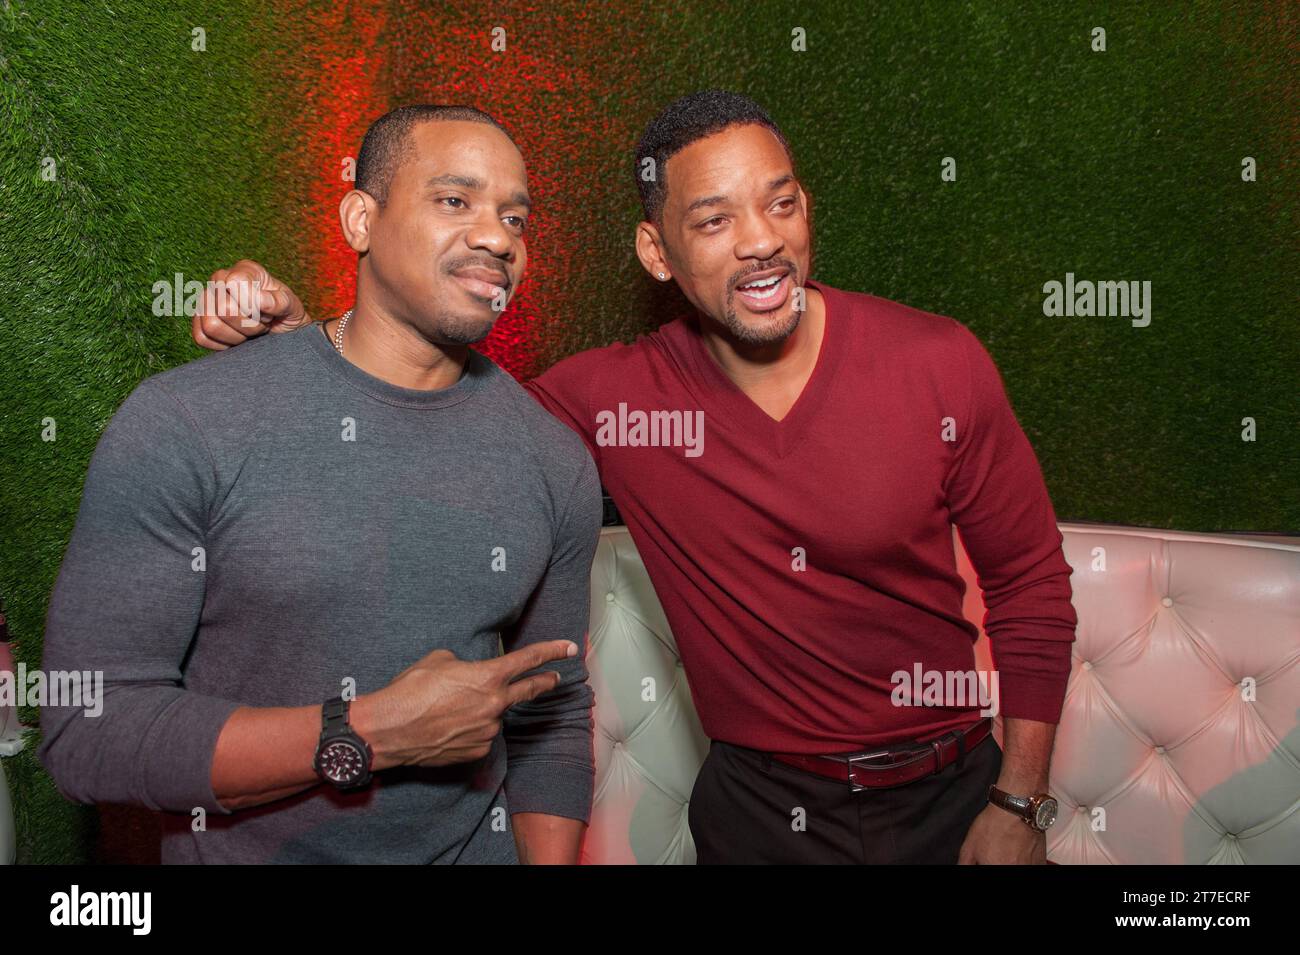 HOLLYWOOD, CA - JAN 25 : L-R Duane Martin and Will Smith at NE-YO & Compound Entertainment 6th Annual Pre-Grammy Awards Midnight Brunch at Lure nightclub on January 25, 2014 in Hollywood, CA Copyright: xPGsidney/MediaPunch.x Credit: Imago/Alamy Live News Stock Photo